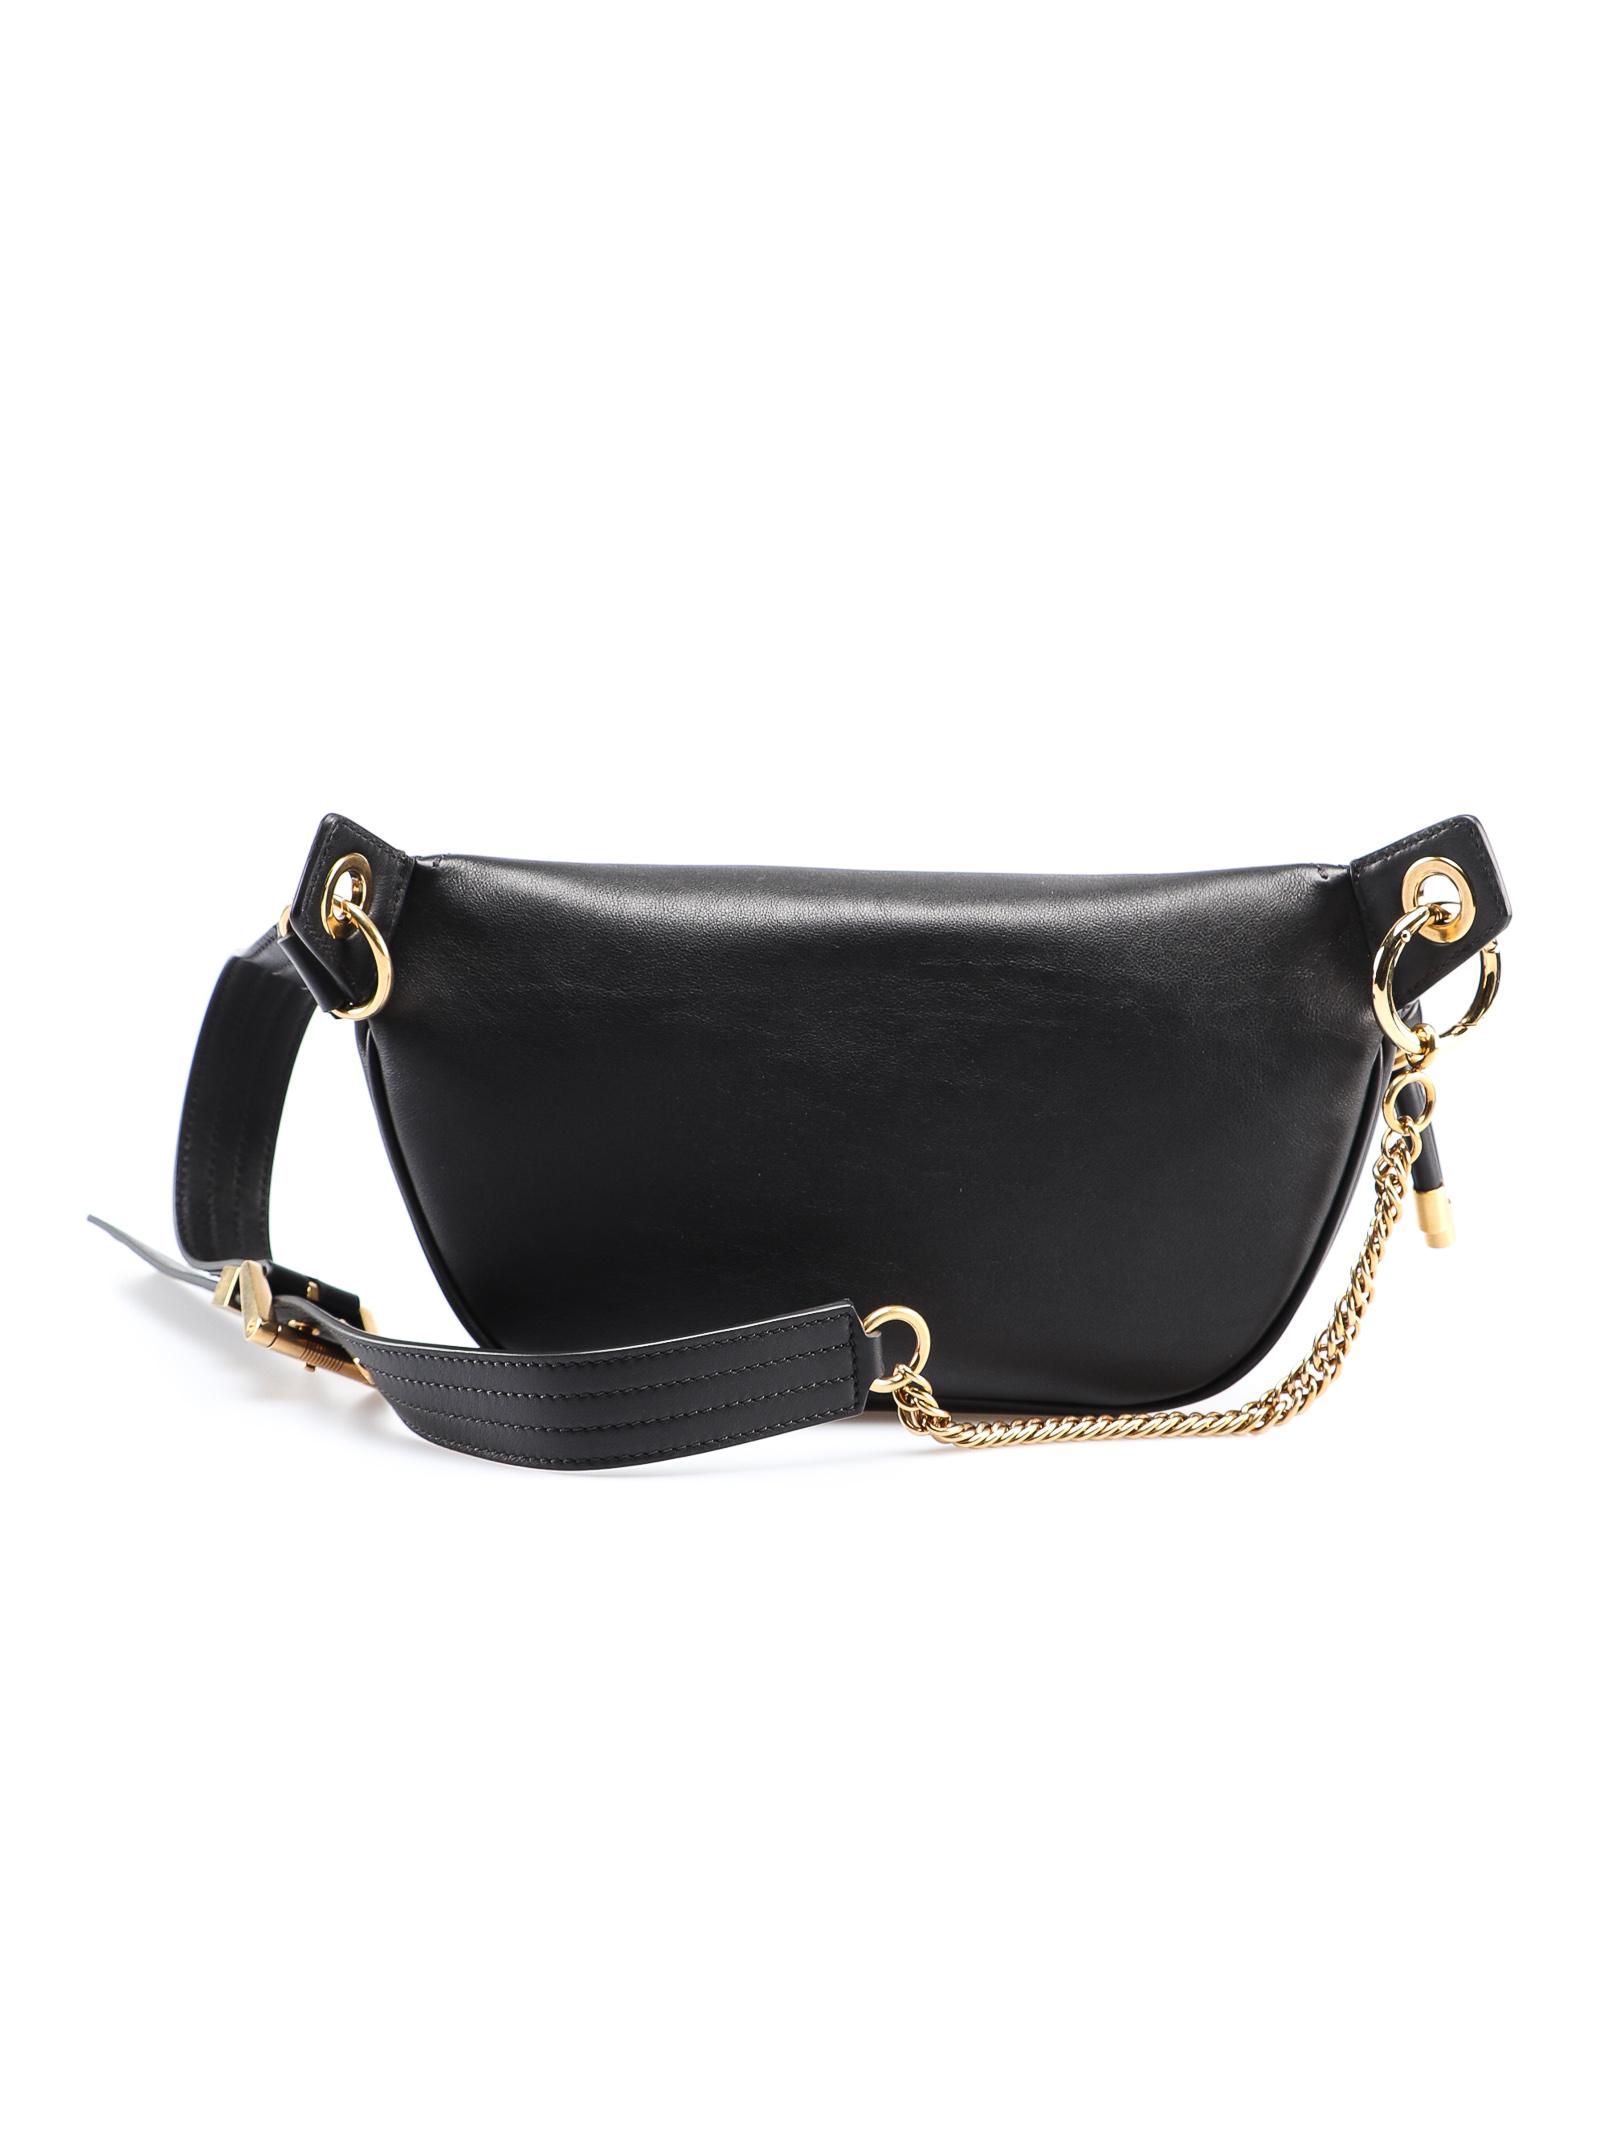 Lyst - Givenchy Whip Leather Belt Bag in Black - Save 11%